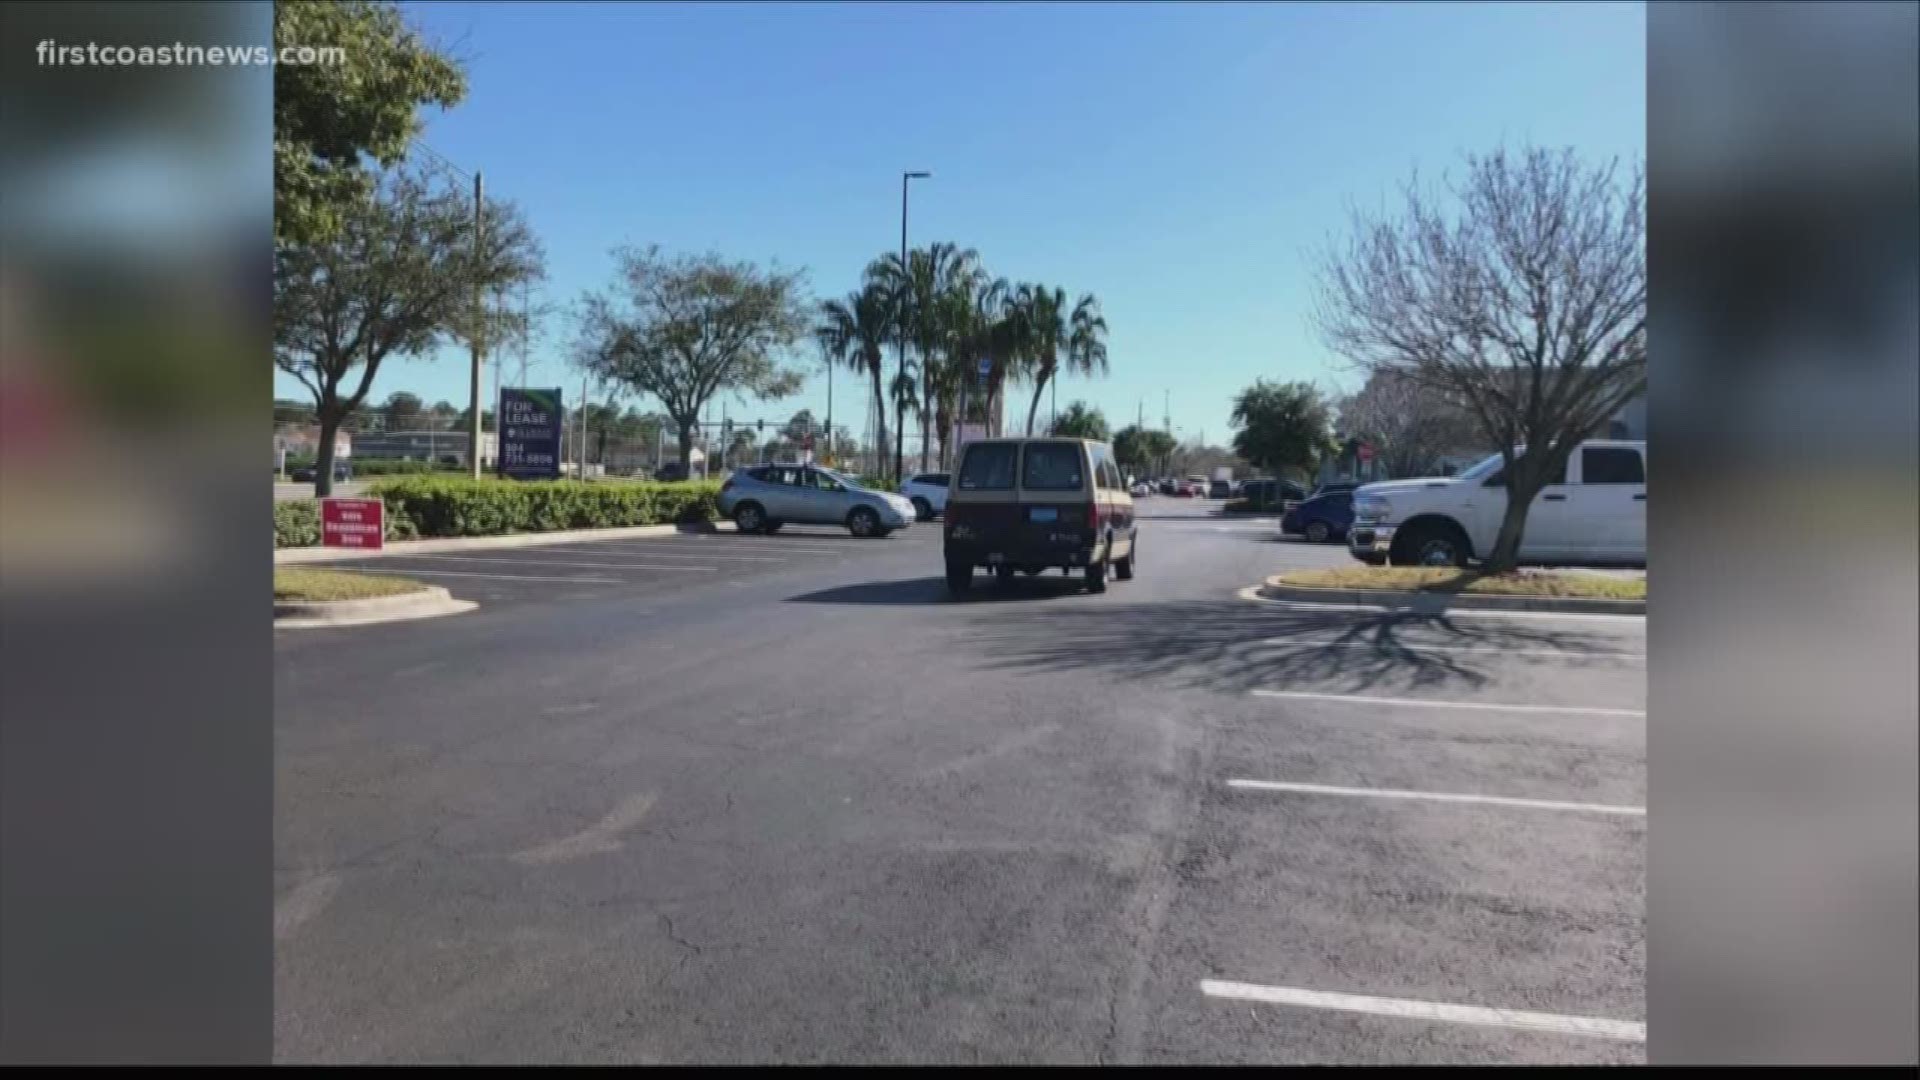 The Jacksonville Sheriff's Office says a van crashed into a tent belonging to the Republican Party of Duval County at a Walmart parking lot.